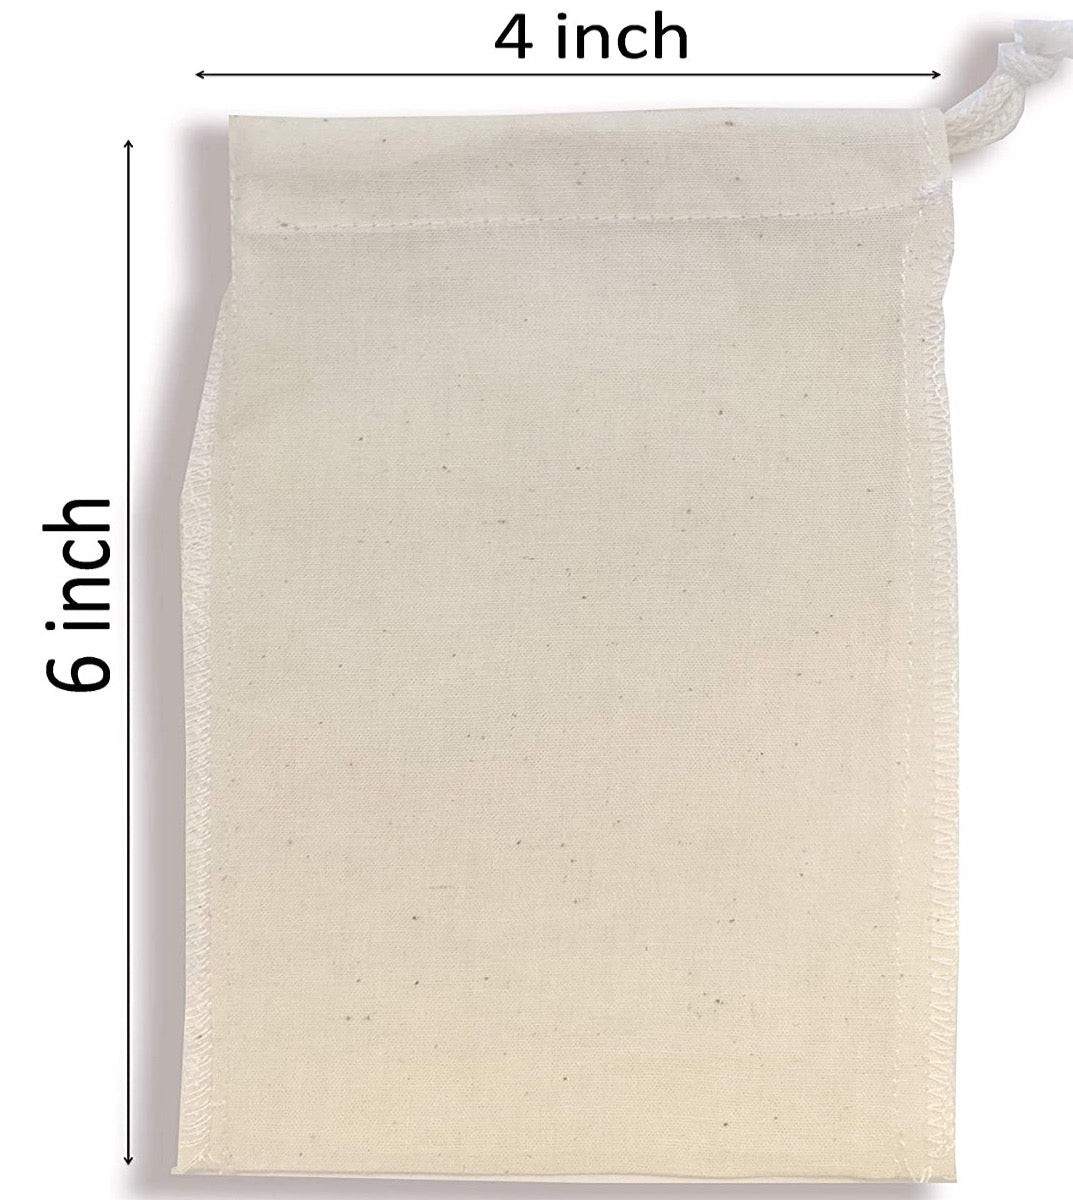 cotton bags for cold brew coffee